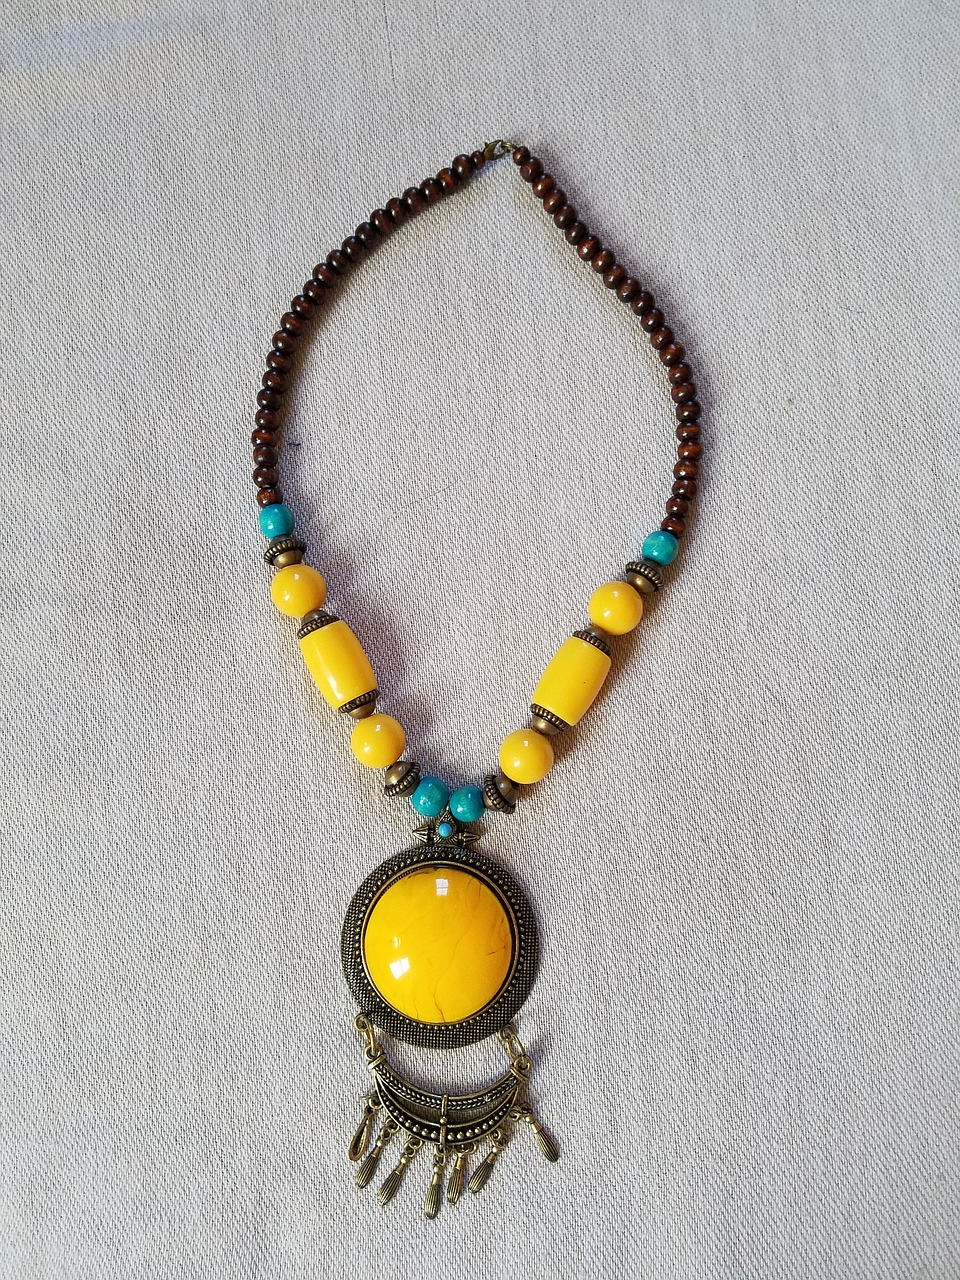 necklace beads and pendant yellow blue and brown necklace free photo